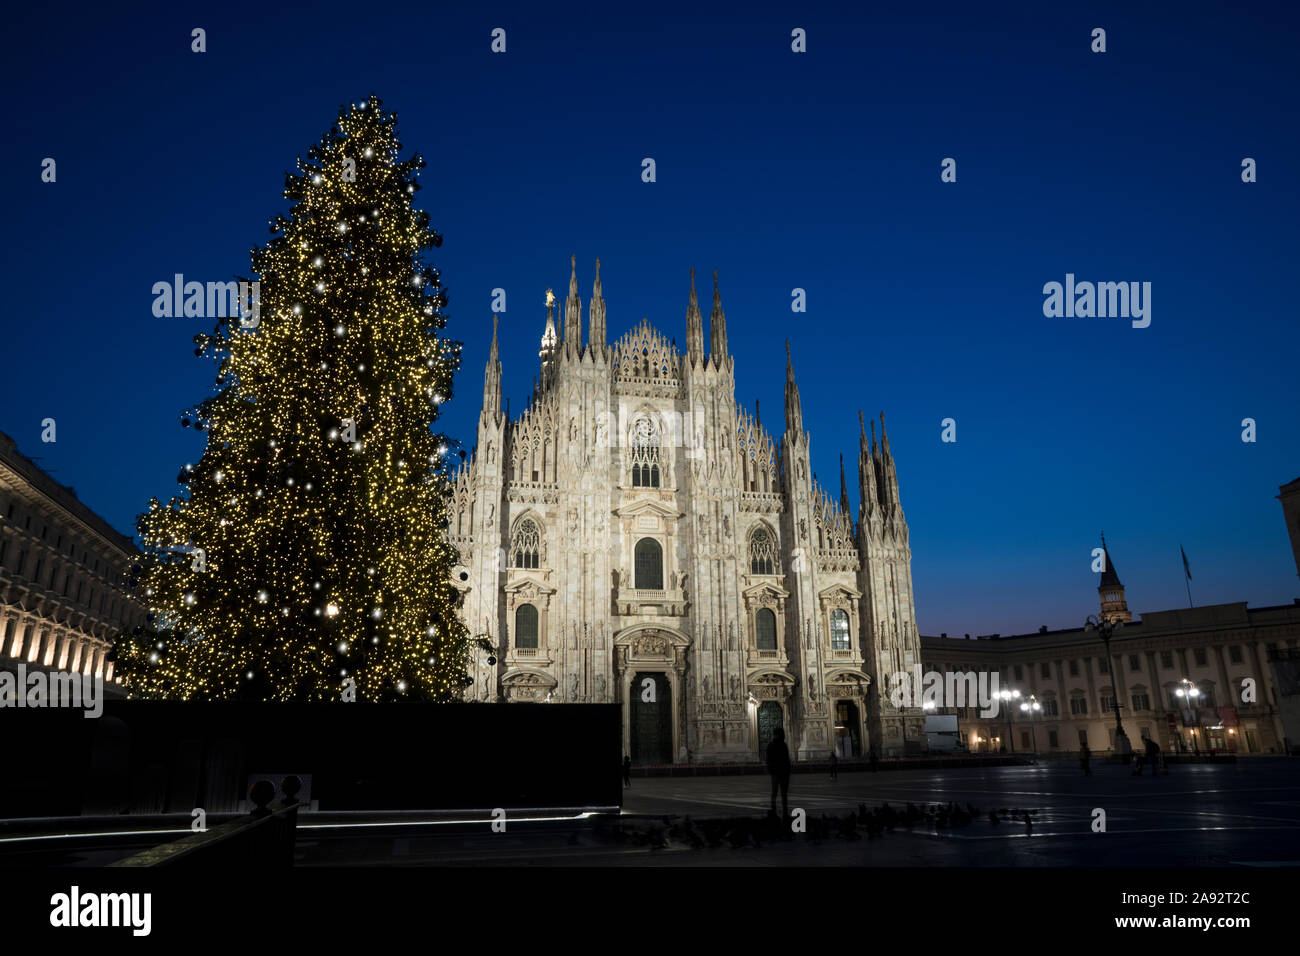 Milan (Italy) in winter: Christmas tree in front of Milan cathedral, Duomo square in december, night view. Stock Photo